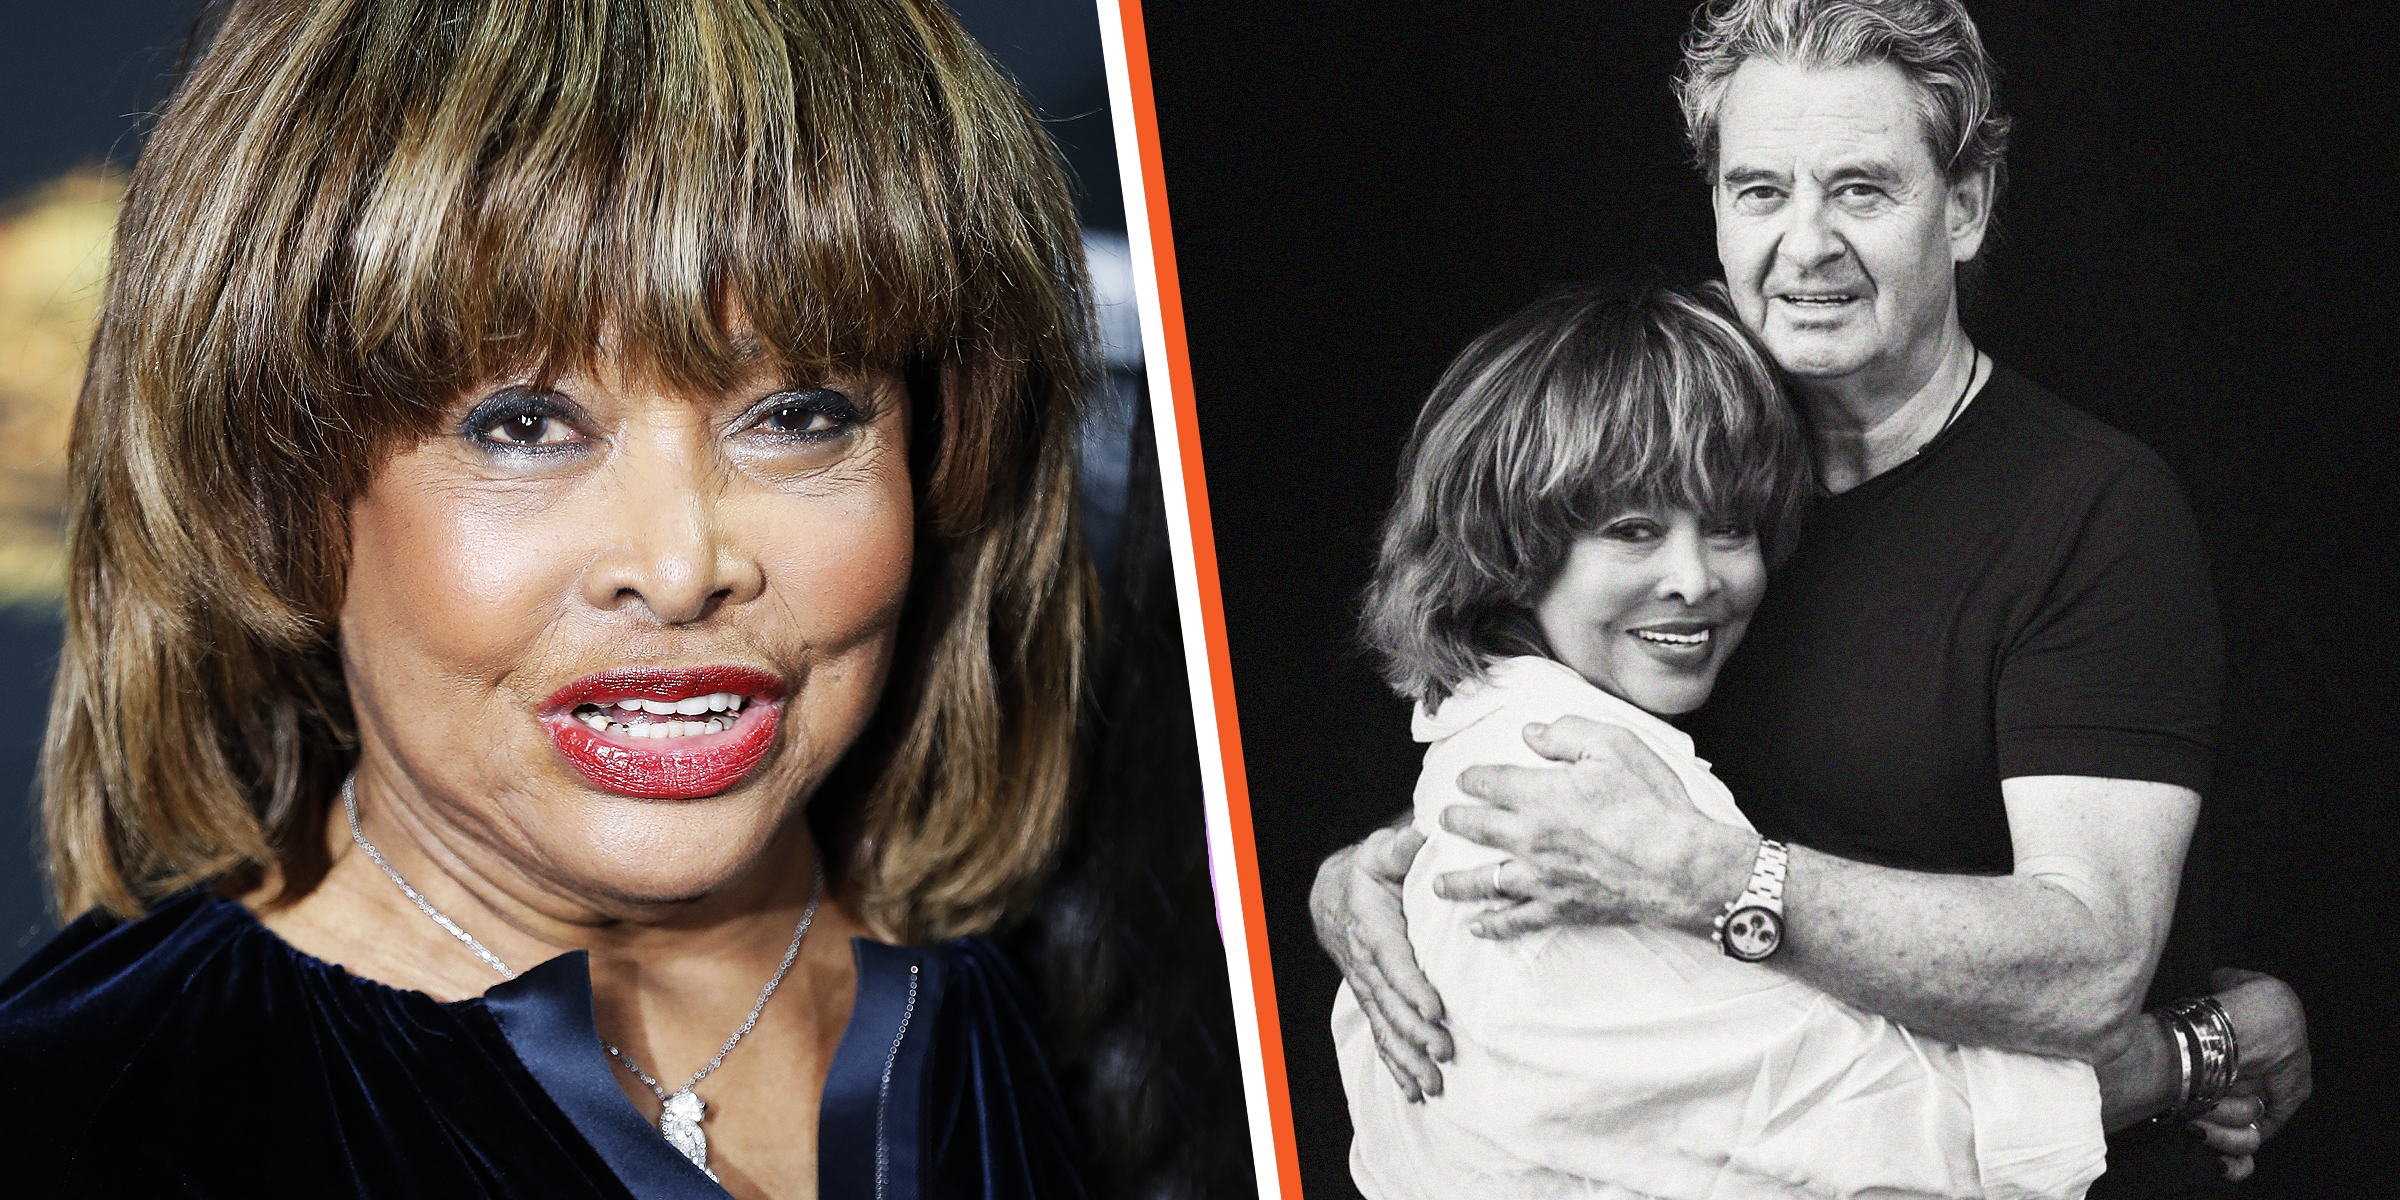 Tina Turner and Erwin Bach | Source: Getty Images | https://www.instagram.com/tinaturner/